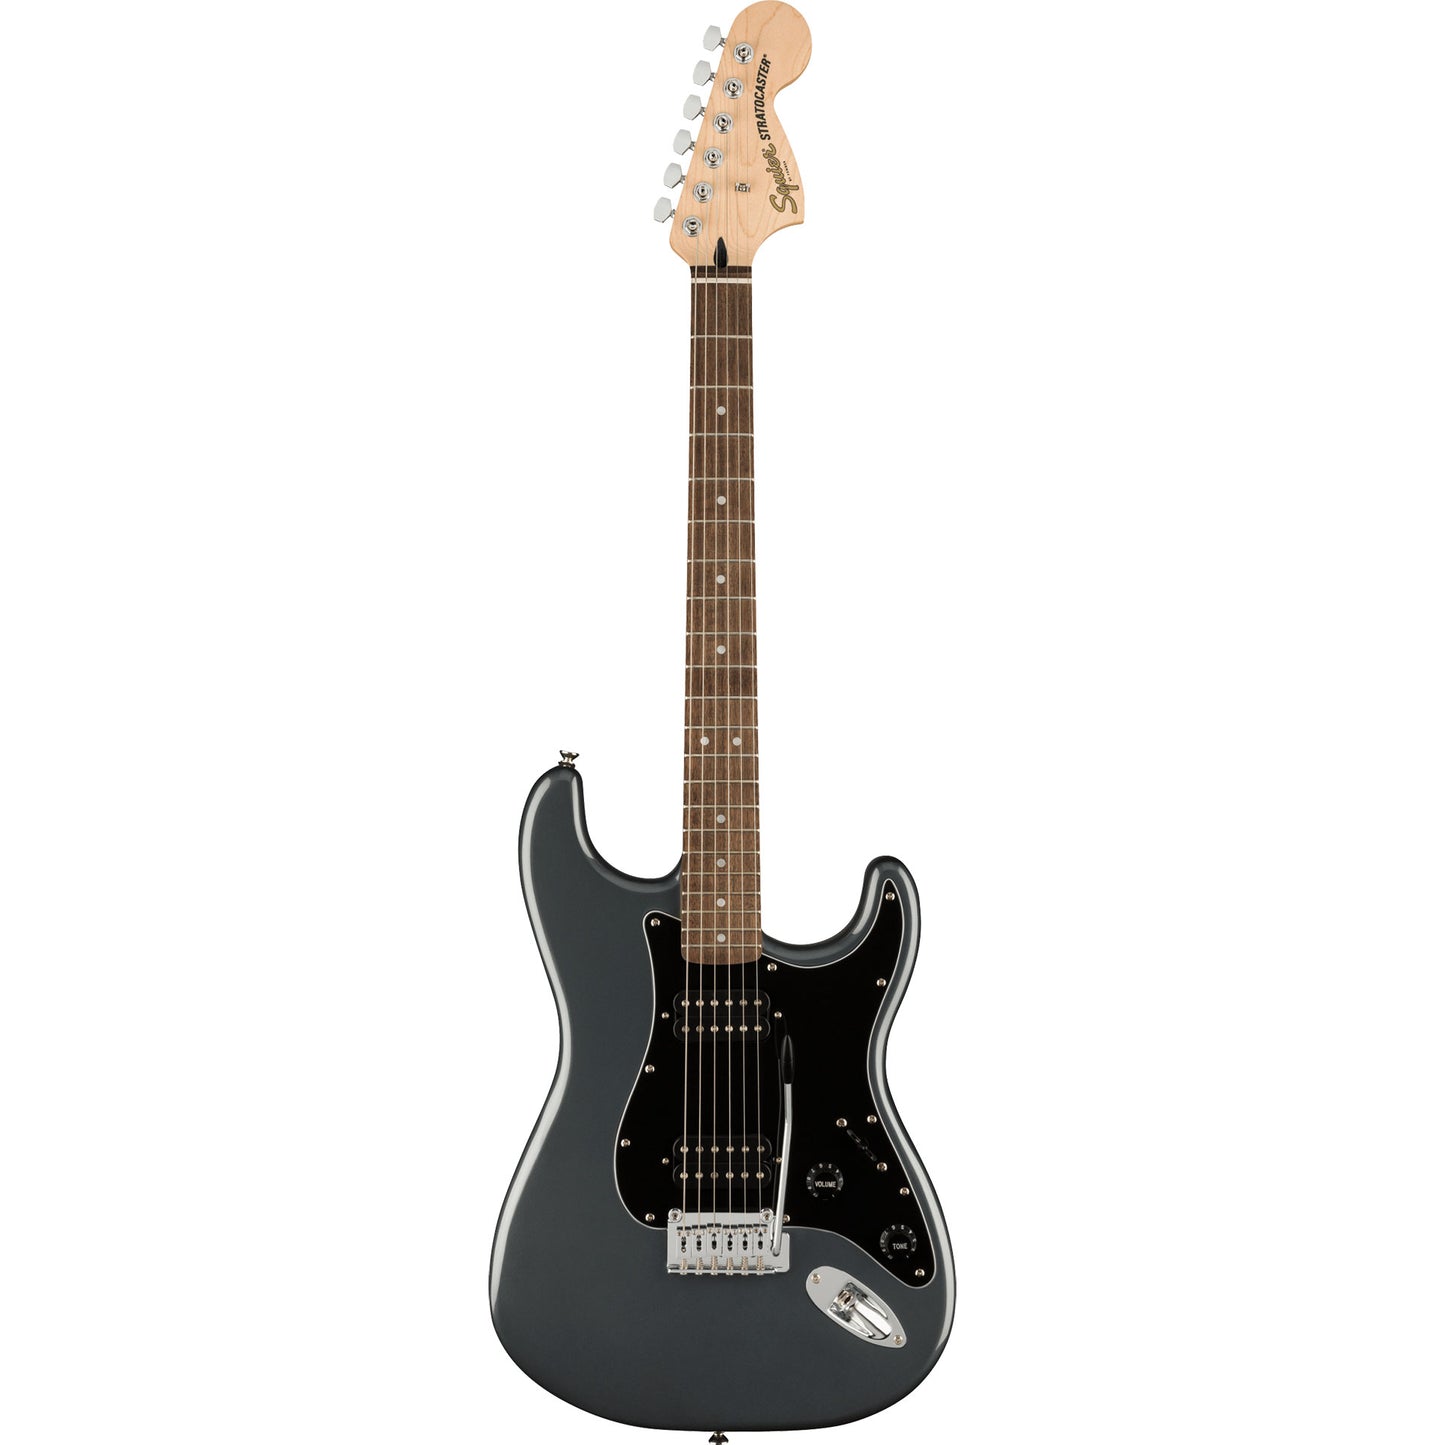 Squier Affinity Series Stratocaster HH Electric Guitar - Charcoal Frost Metallic